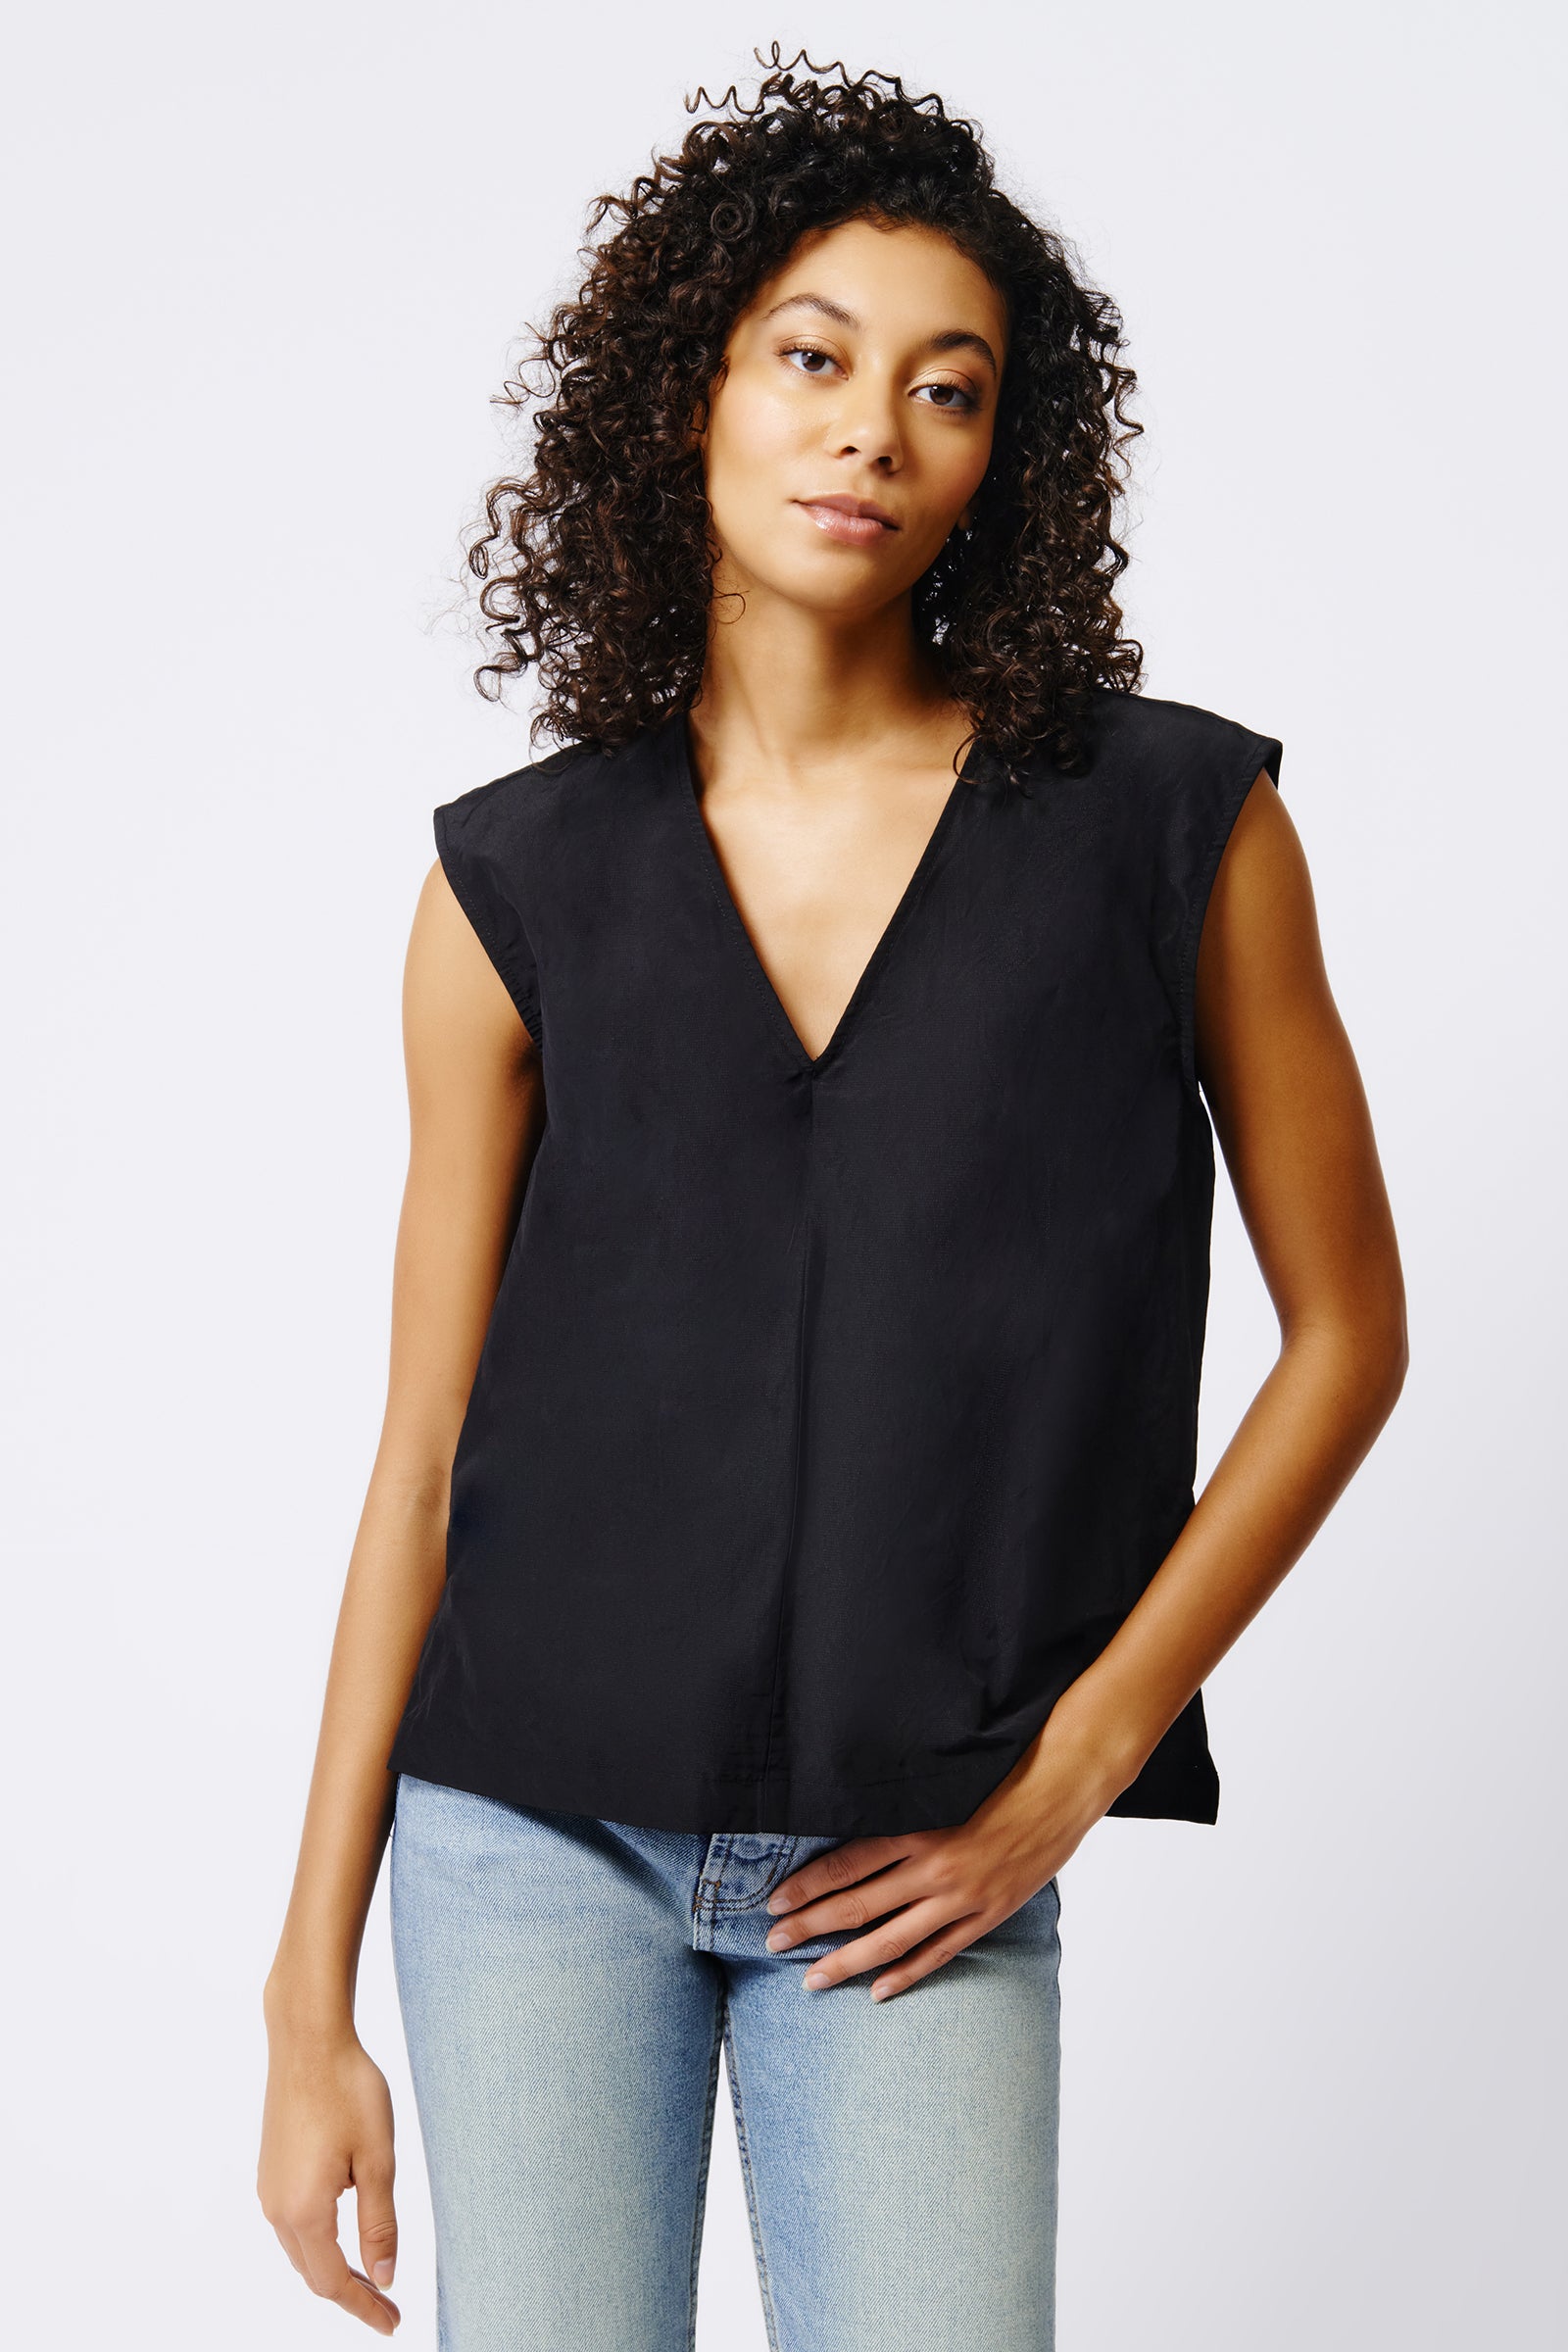 Kal Rieman Ava V Neck Shell in Black on Model Front View Crop